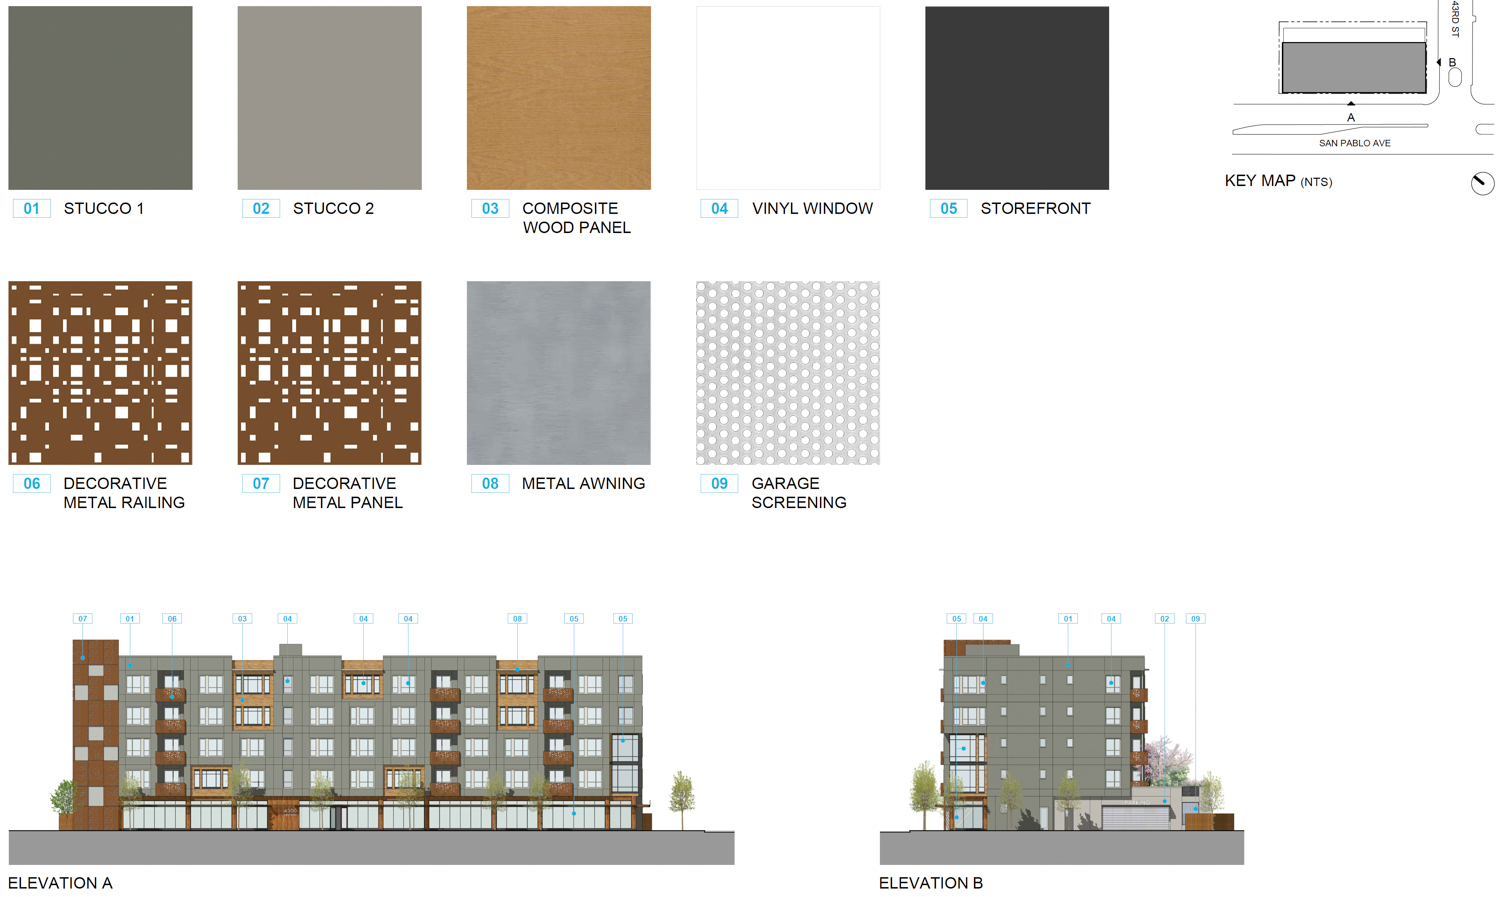 4300 San Pablo Avenue elevations and facade material list, illustration by KTGY